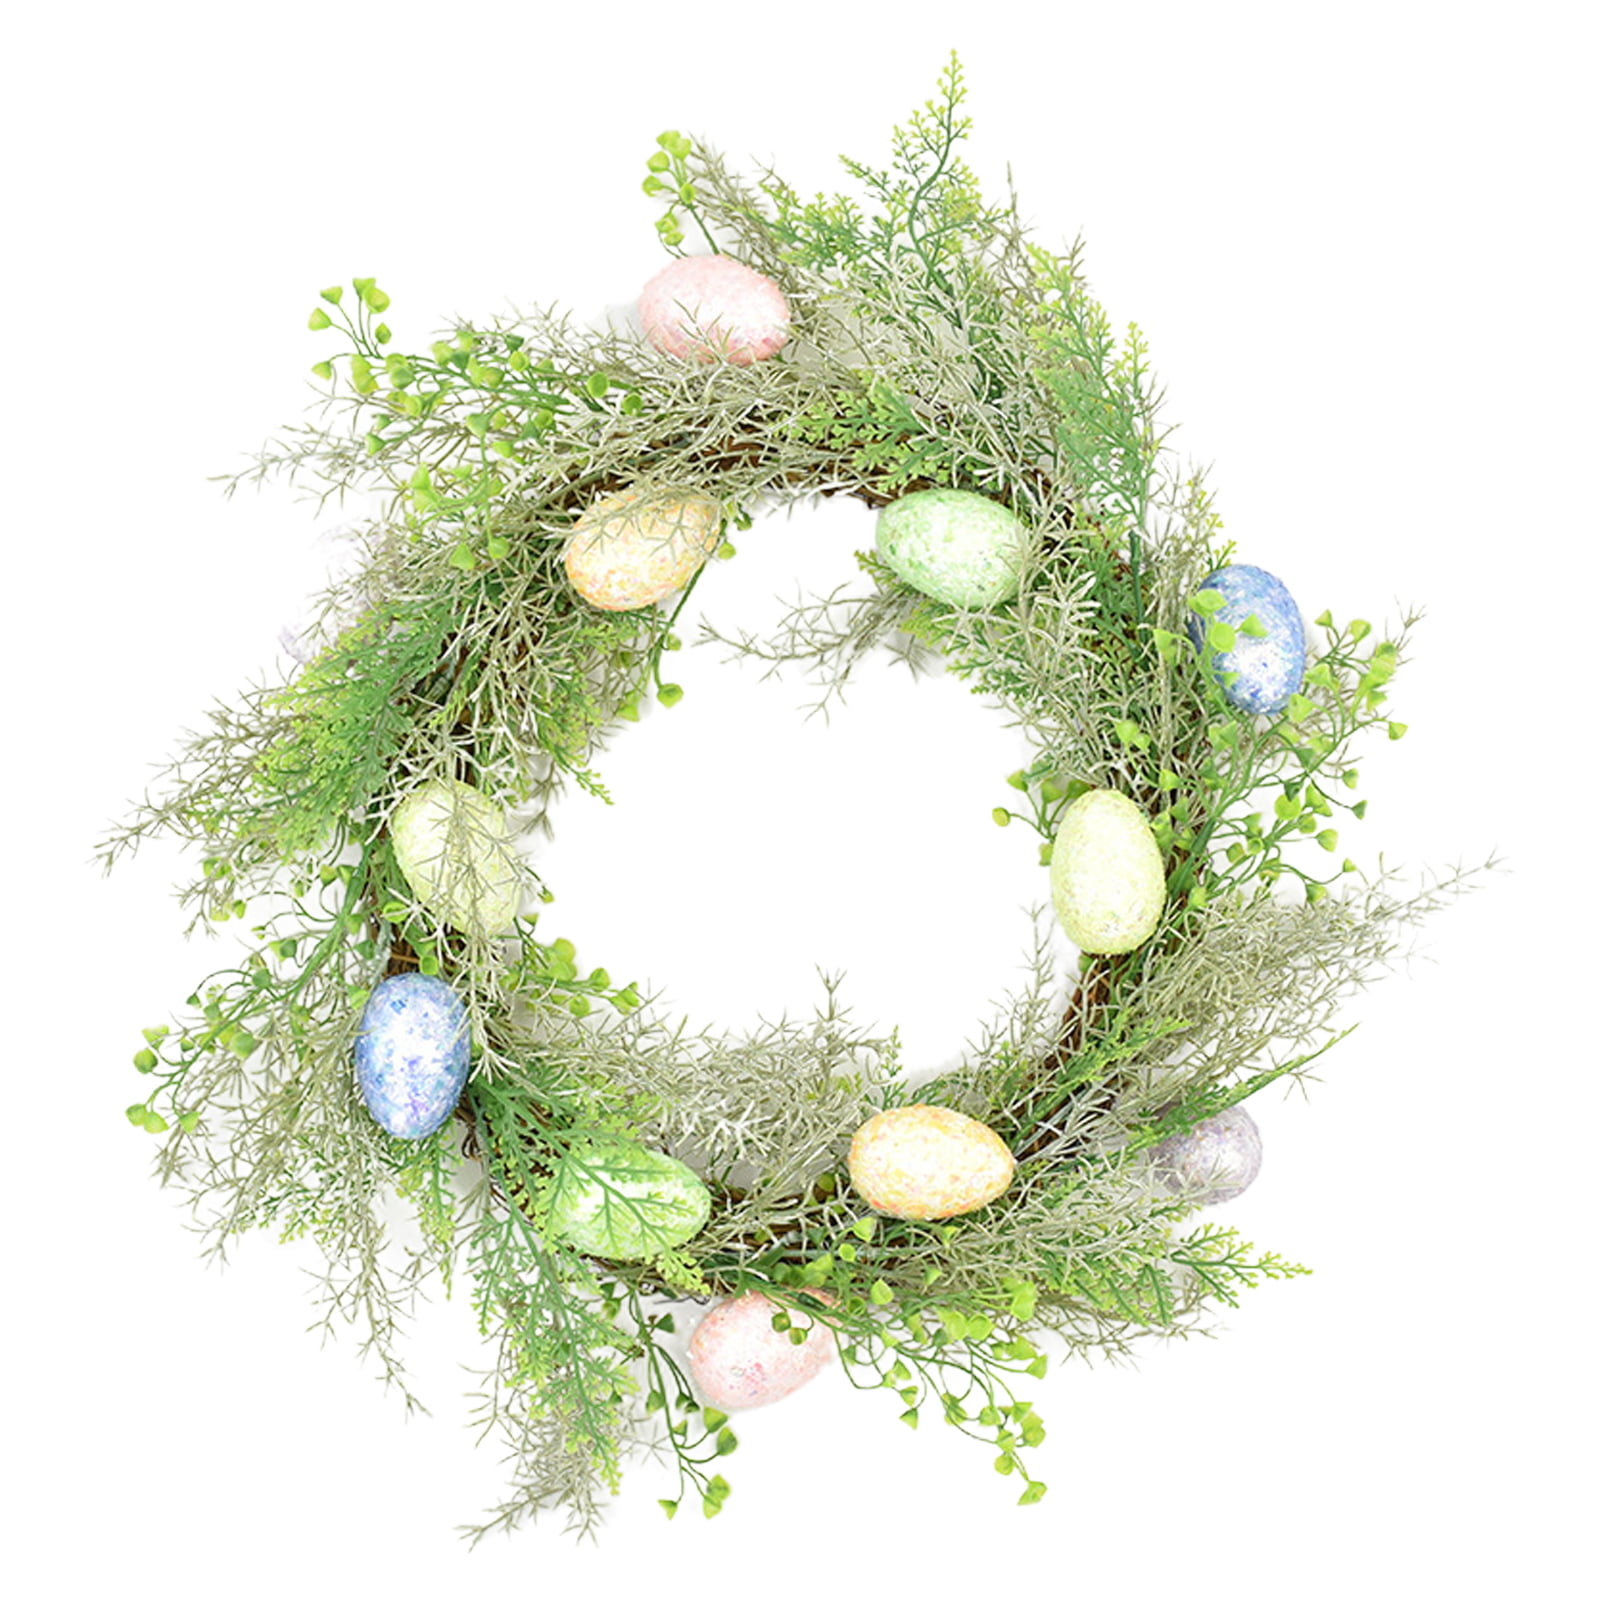 Details about   NEW 3 PC SET HANDMADE GREEN GENUINE FEATHER CHRISTMAS,HOLIDAY DECORATIVE WREATH 